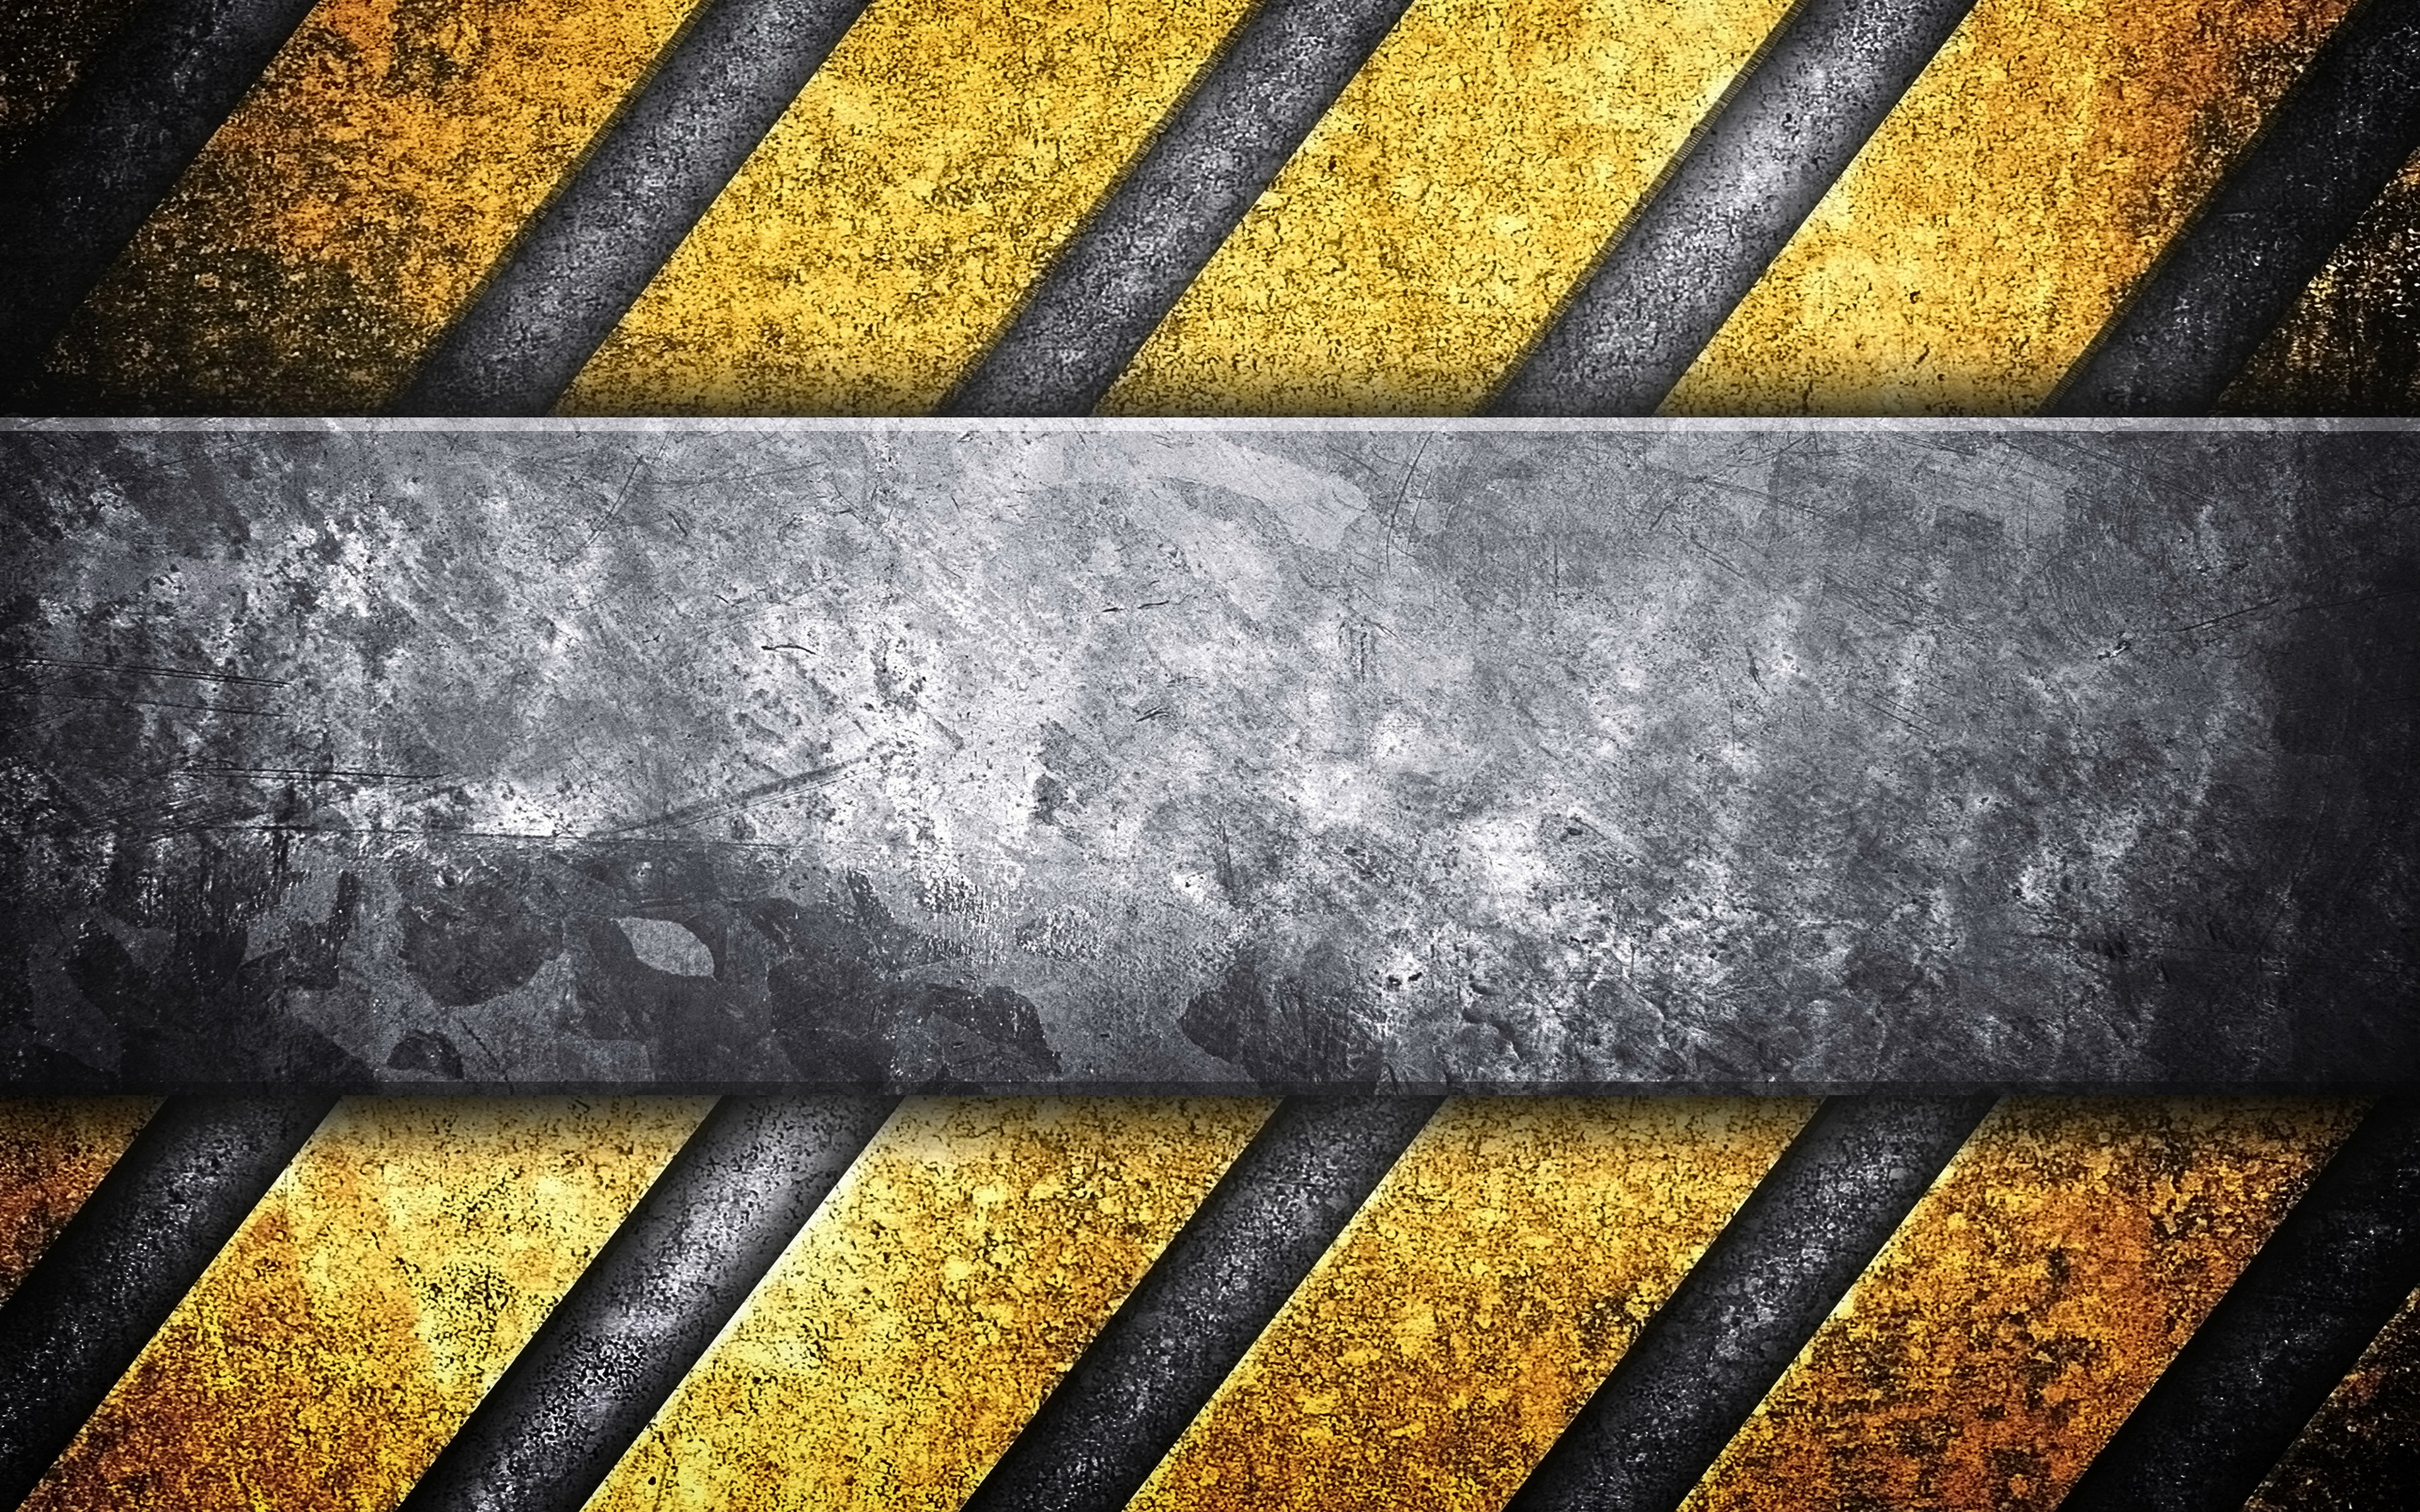 Download wallpaper steel plate, 4k, caution strips, warning background, grunge, metal background, yellow lines, warning tapes for desktop with resolution 3840x2400. High Quality HD picture wallpaper